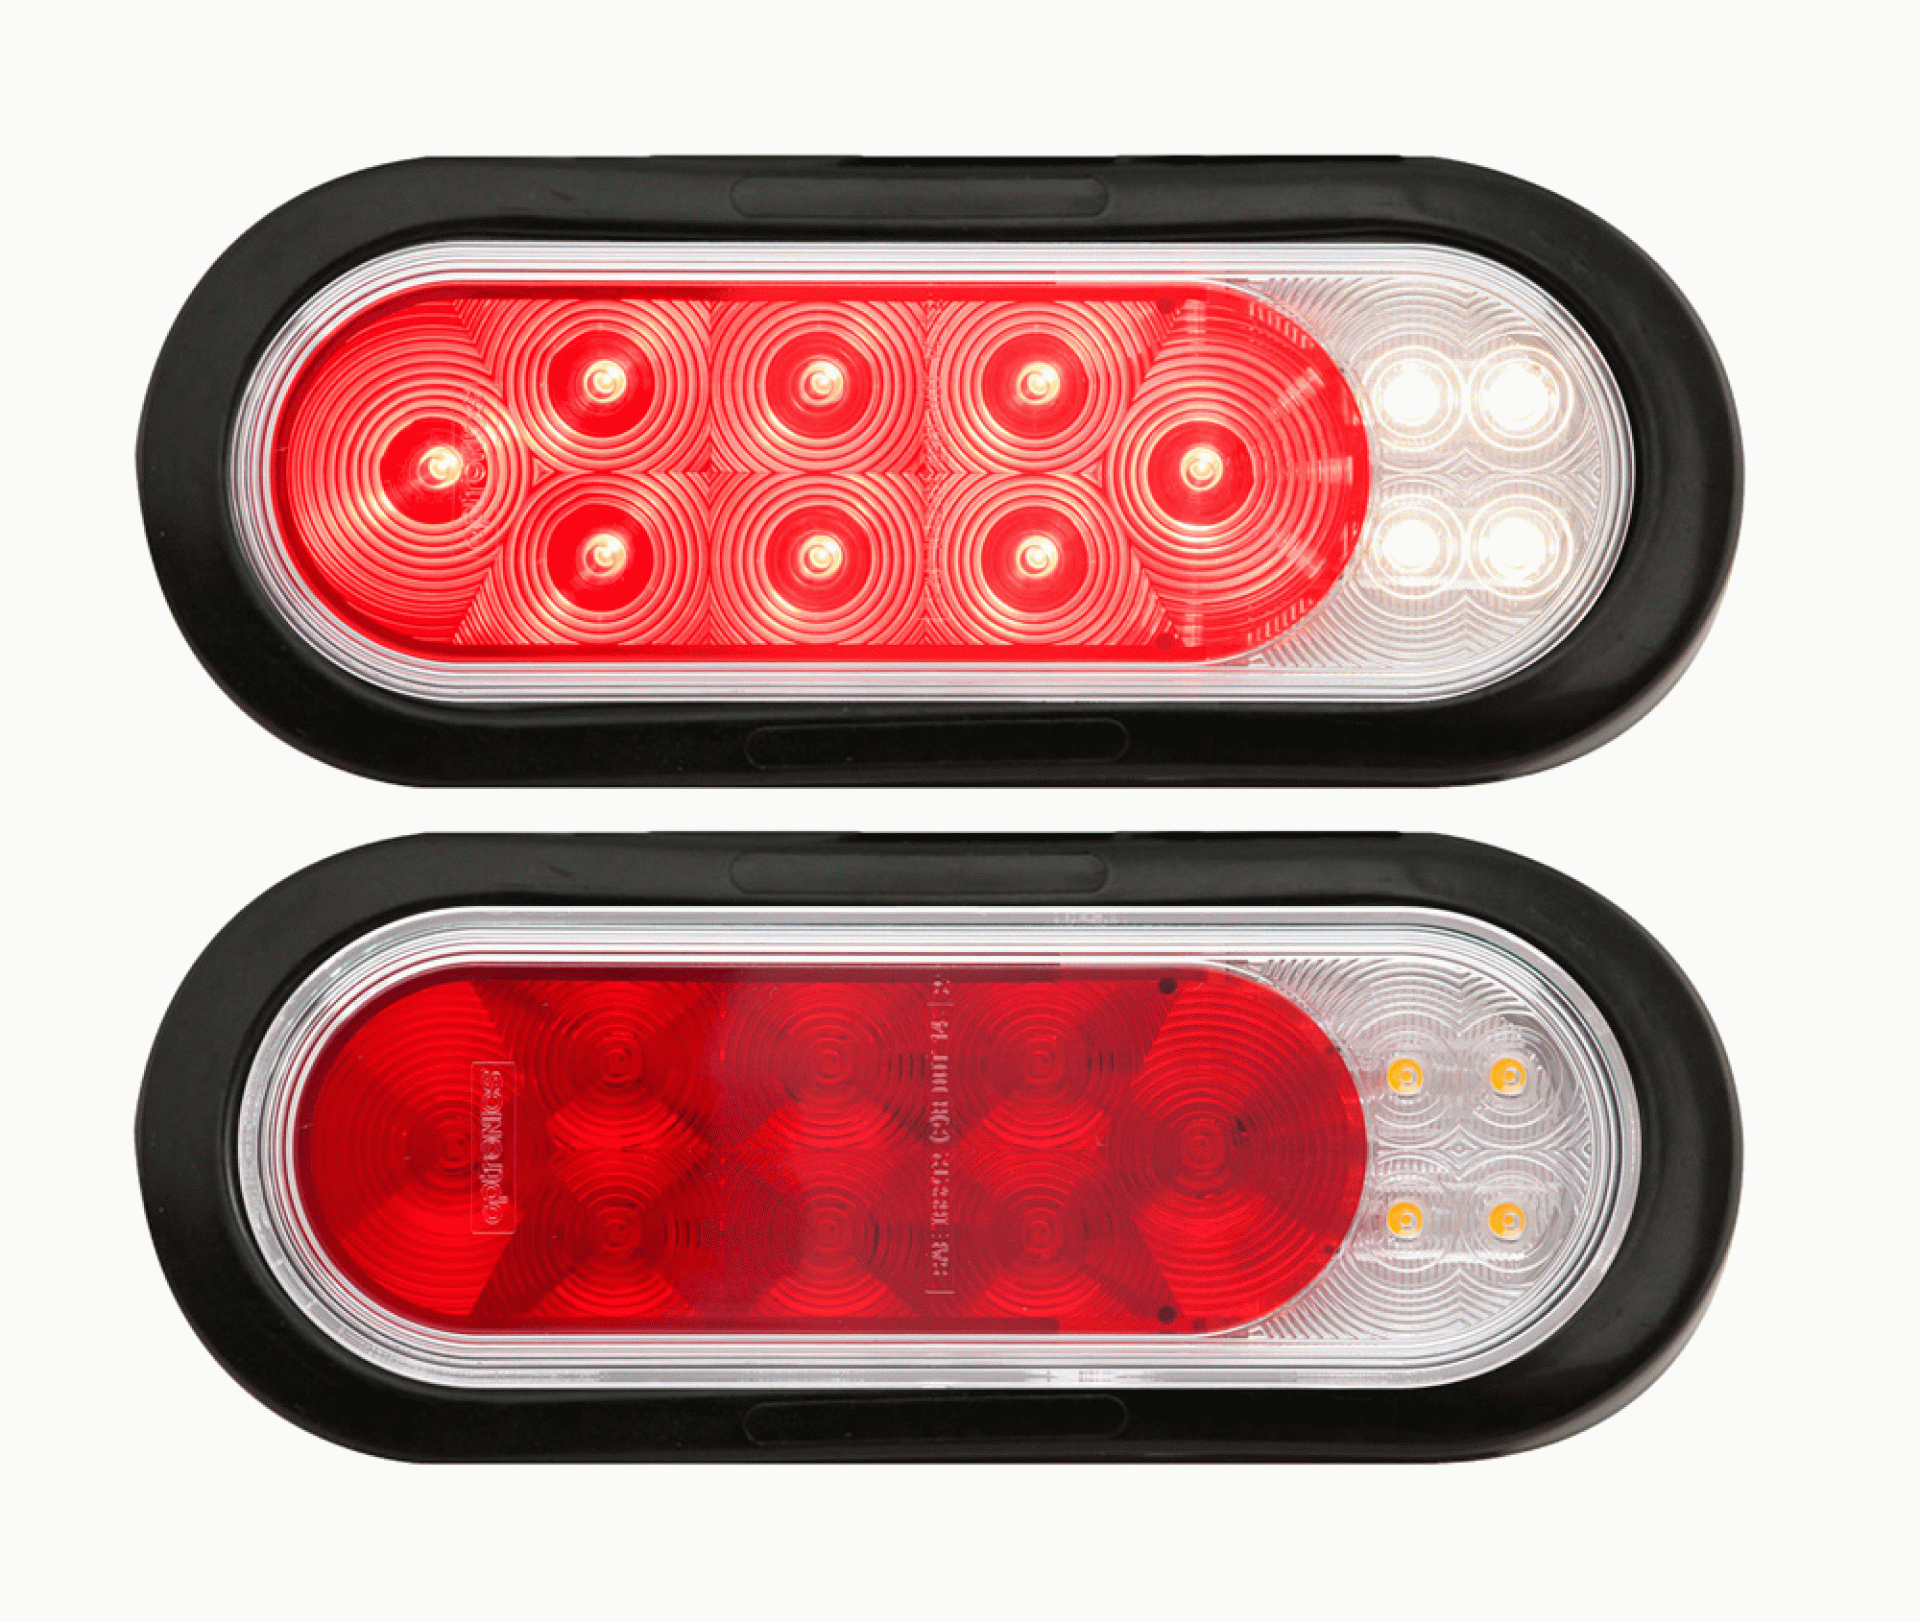 OPTRONICS INTERNATIONAL LLC | TLL211XRTMK | Fusion 6" LED Combination Stop/Turn/Tail/Back-Up Light KIT RED AND WHITE 16 DIODES